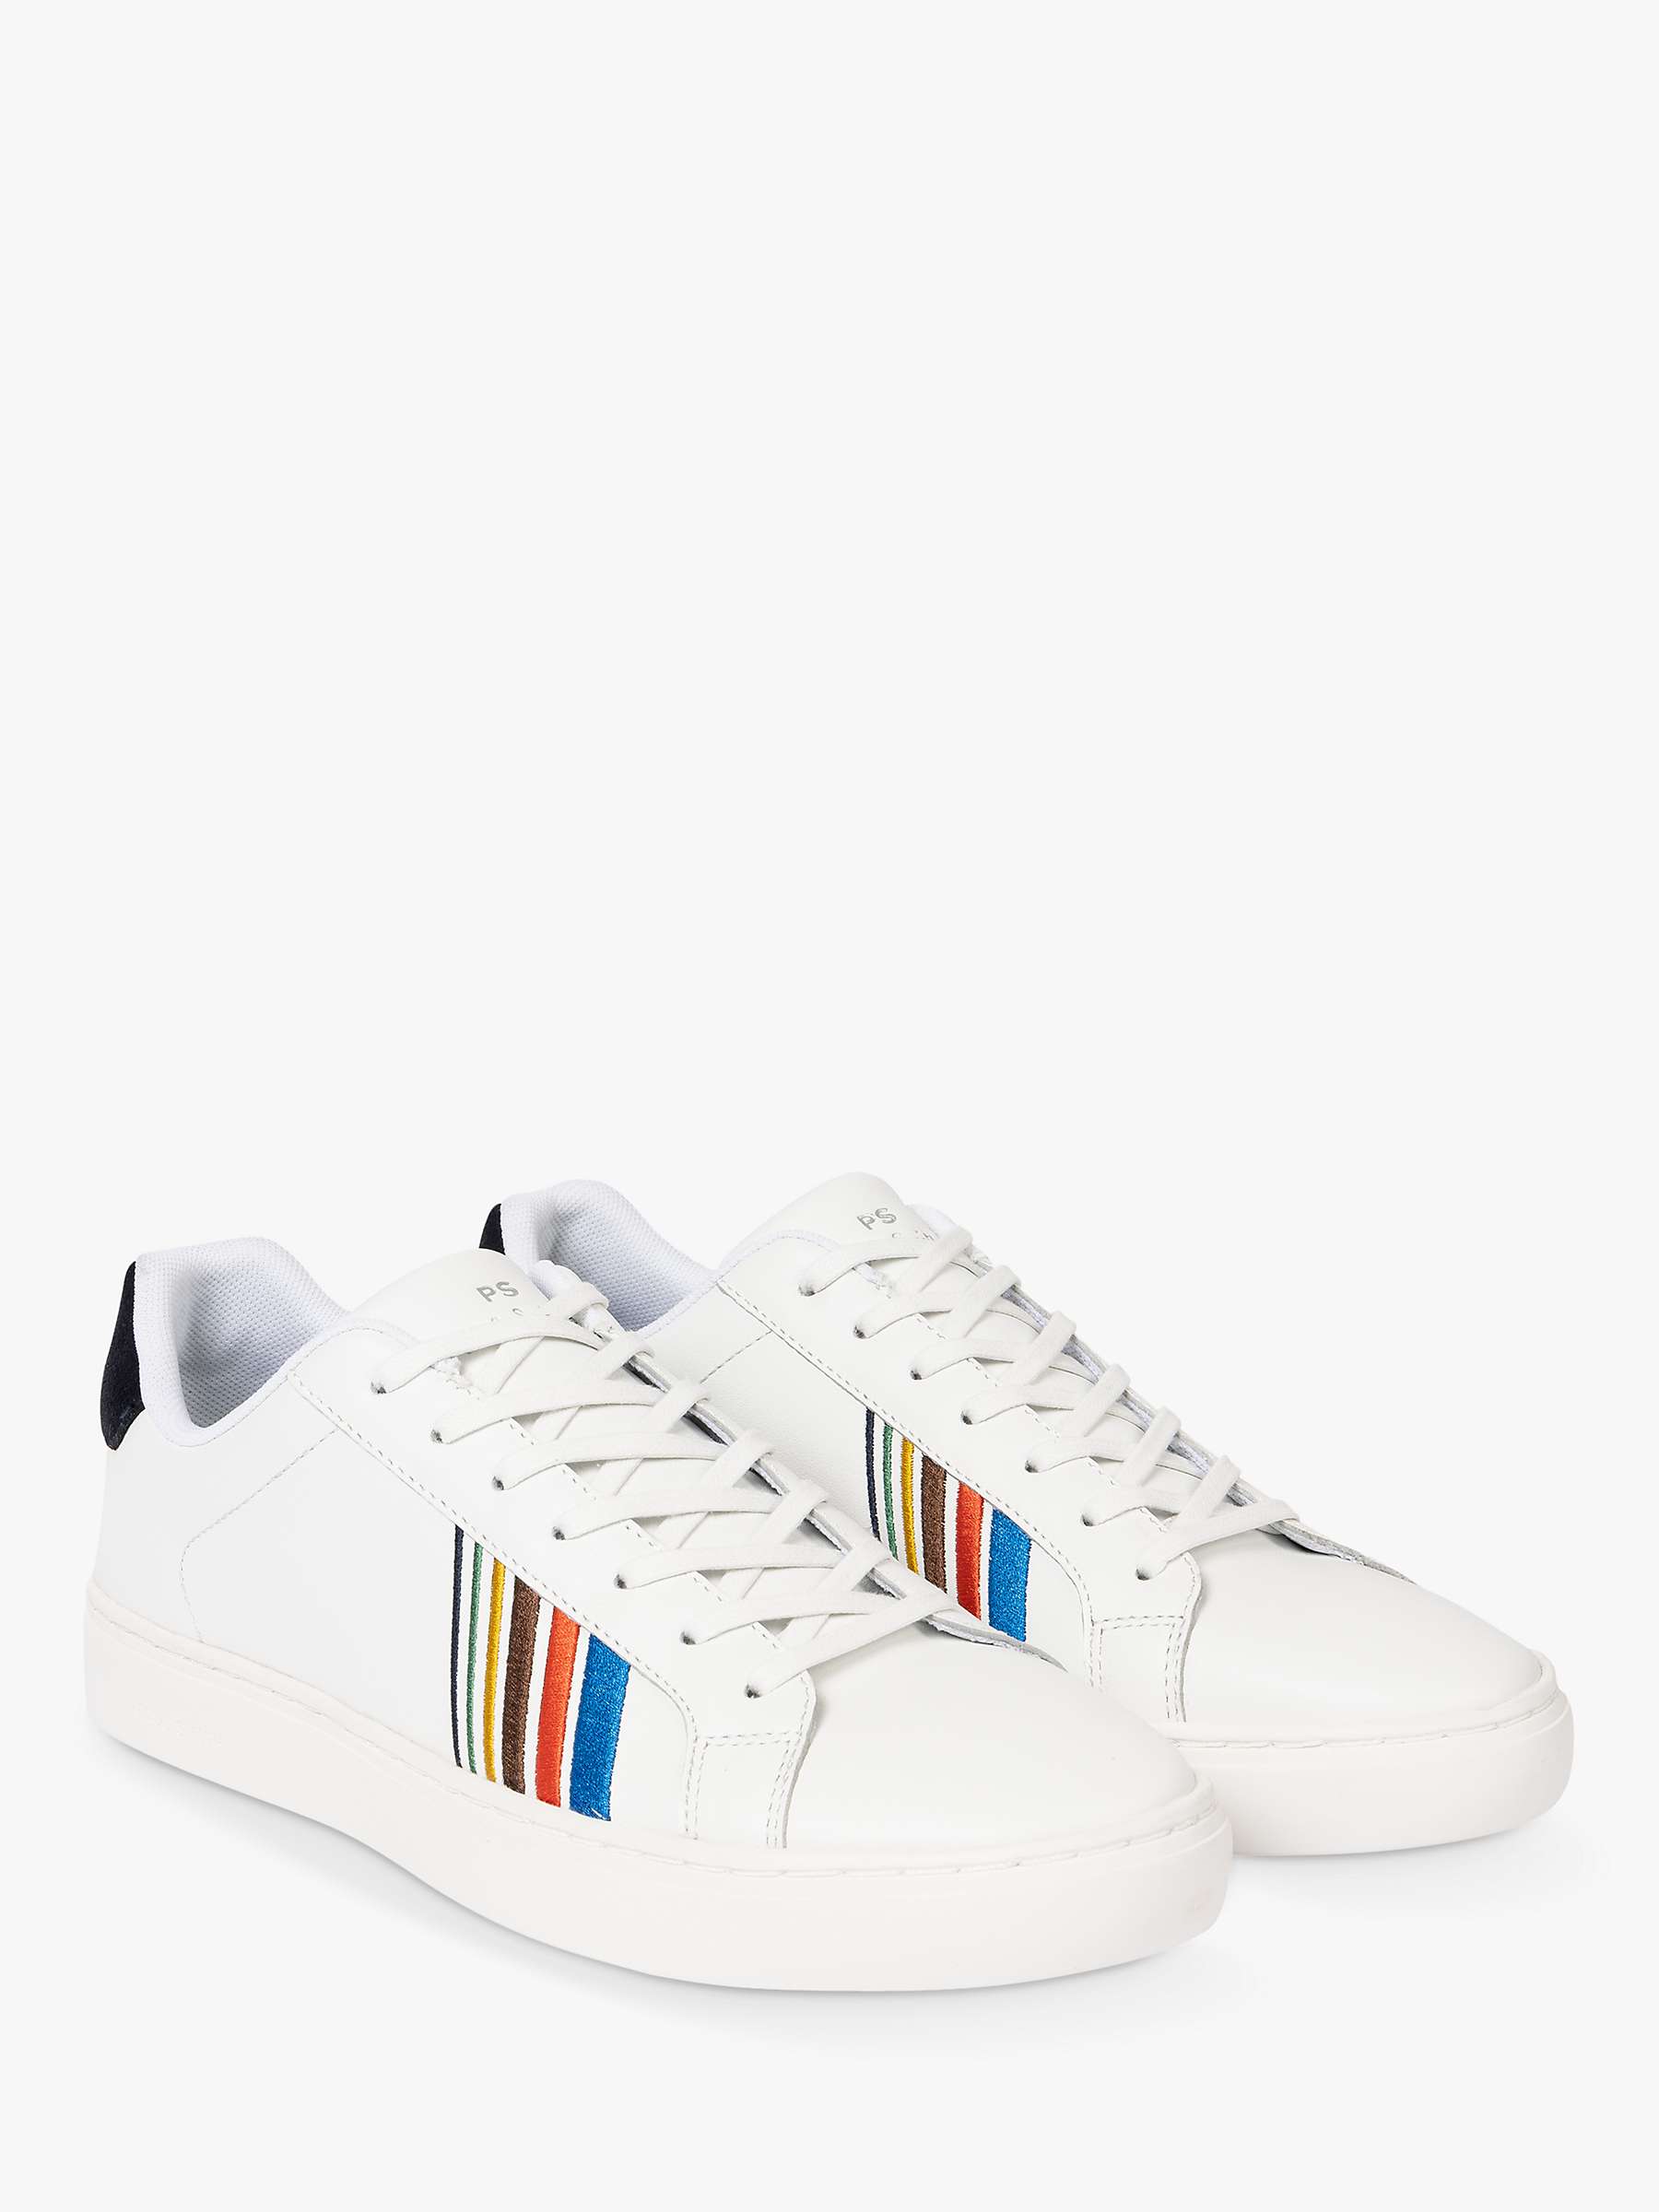 Buy Paul Smith Rex Embroidery Shoes, White/Multi Online at johnlewis.com